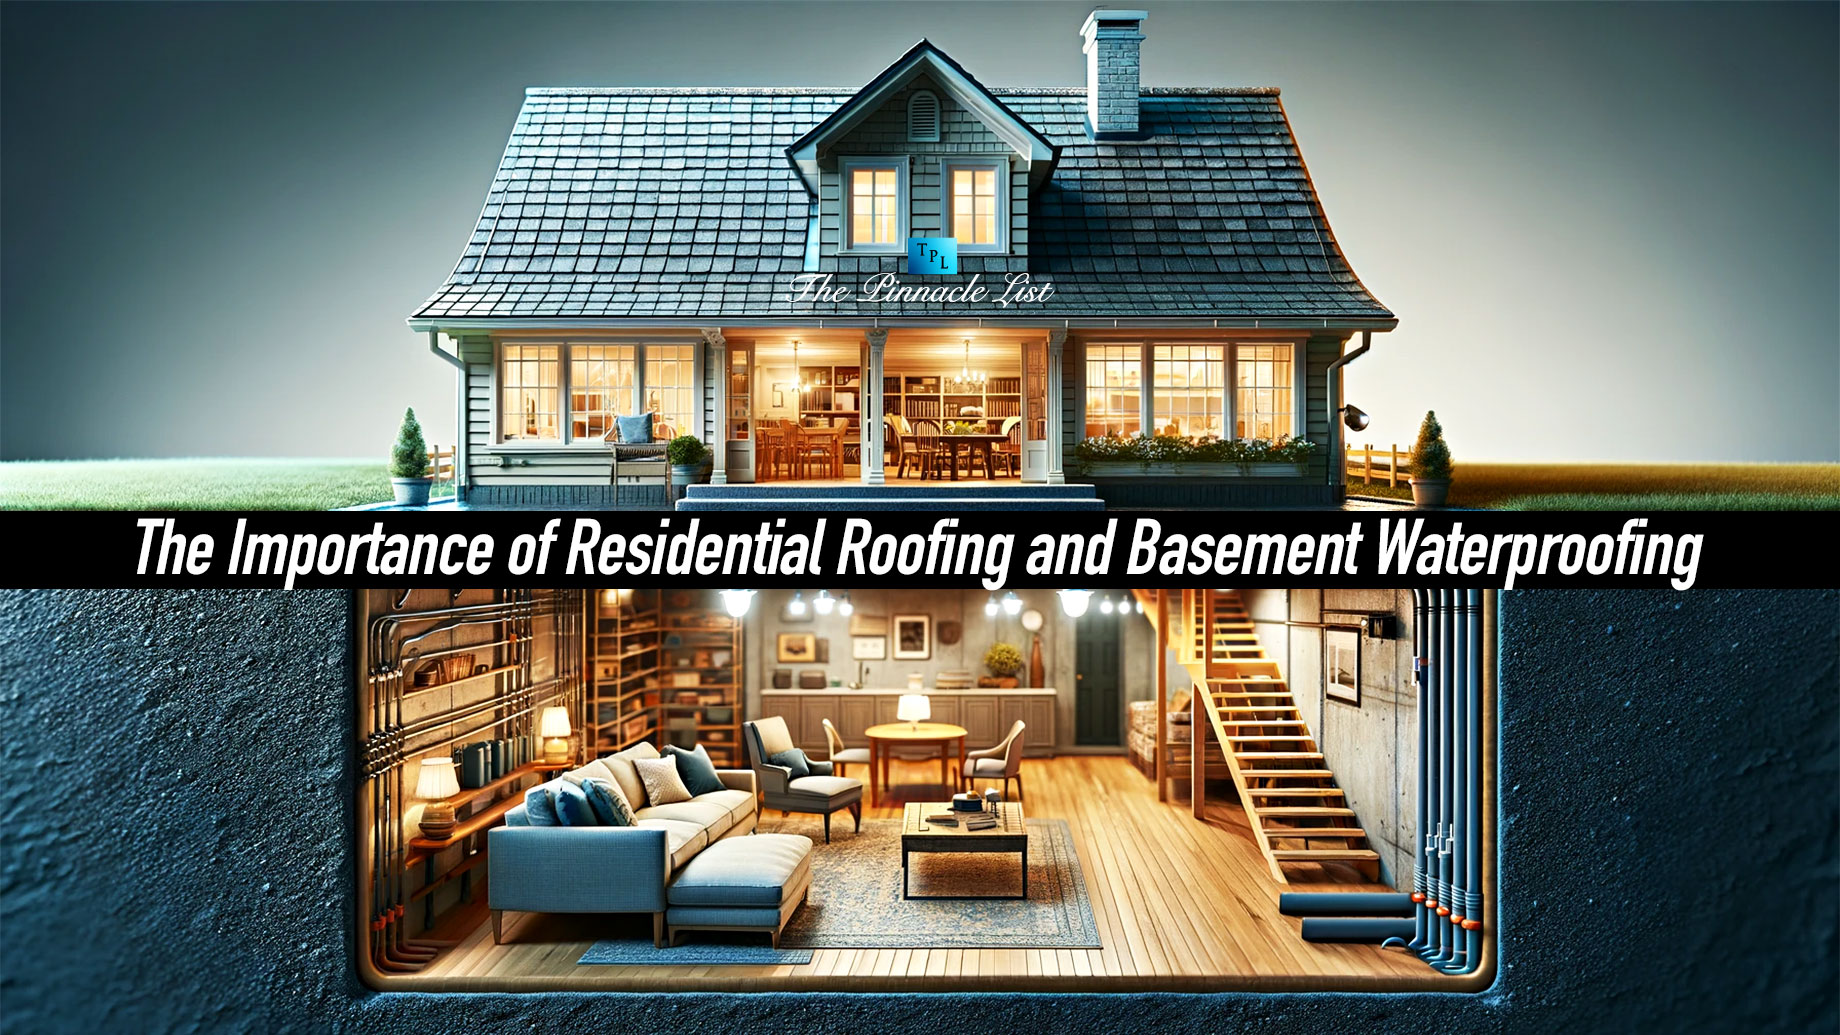 The Importance of Residential Roofing and Basement Waterproofing